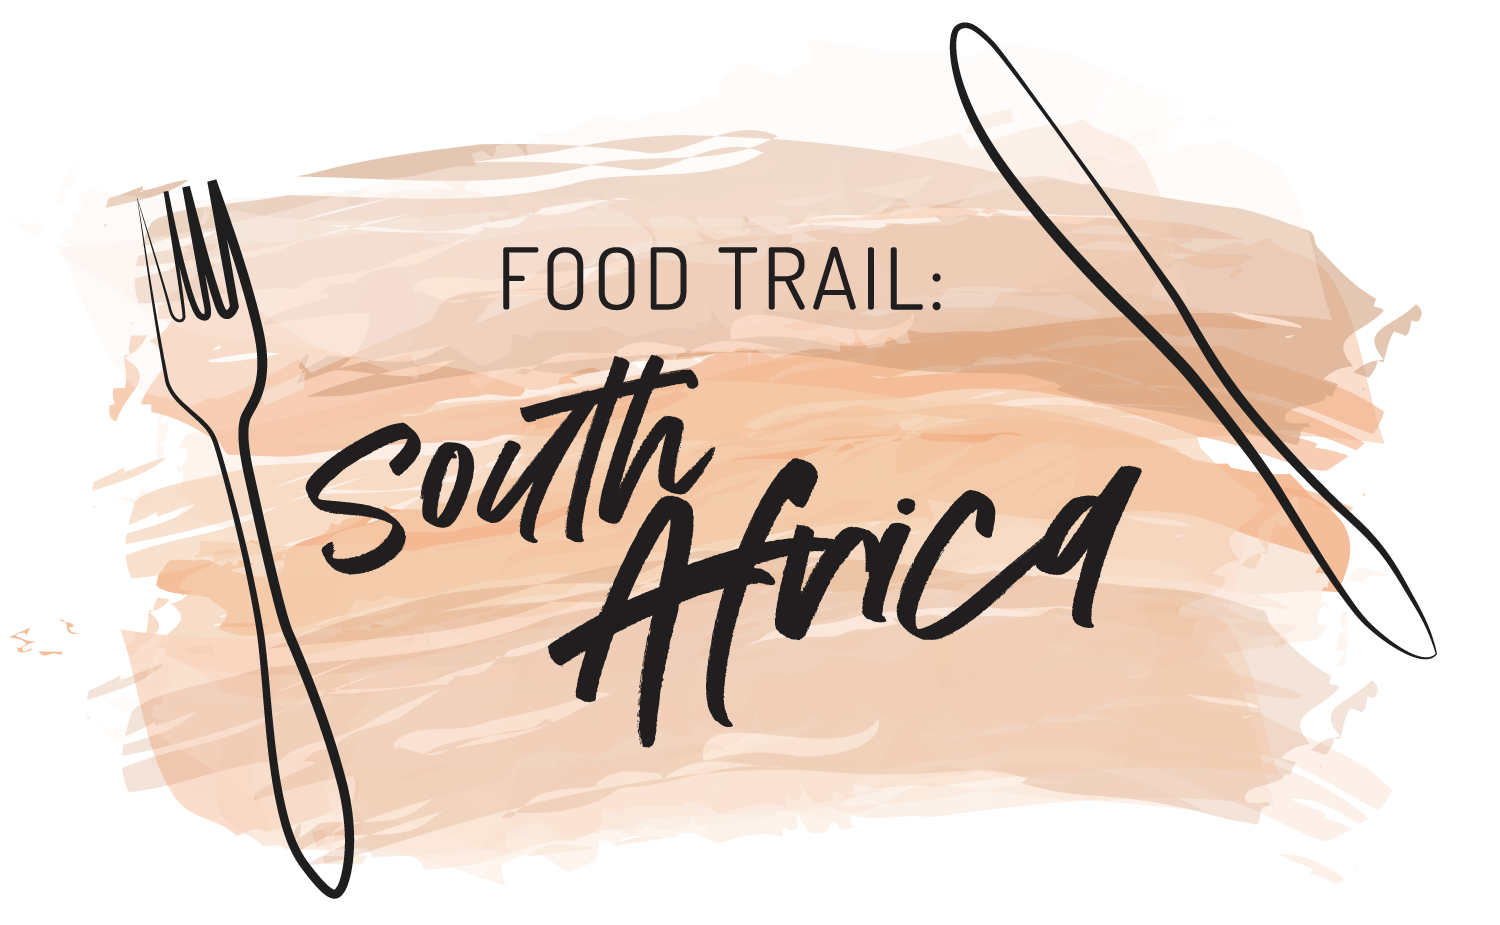 Food Trail South Africa